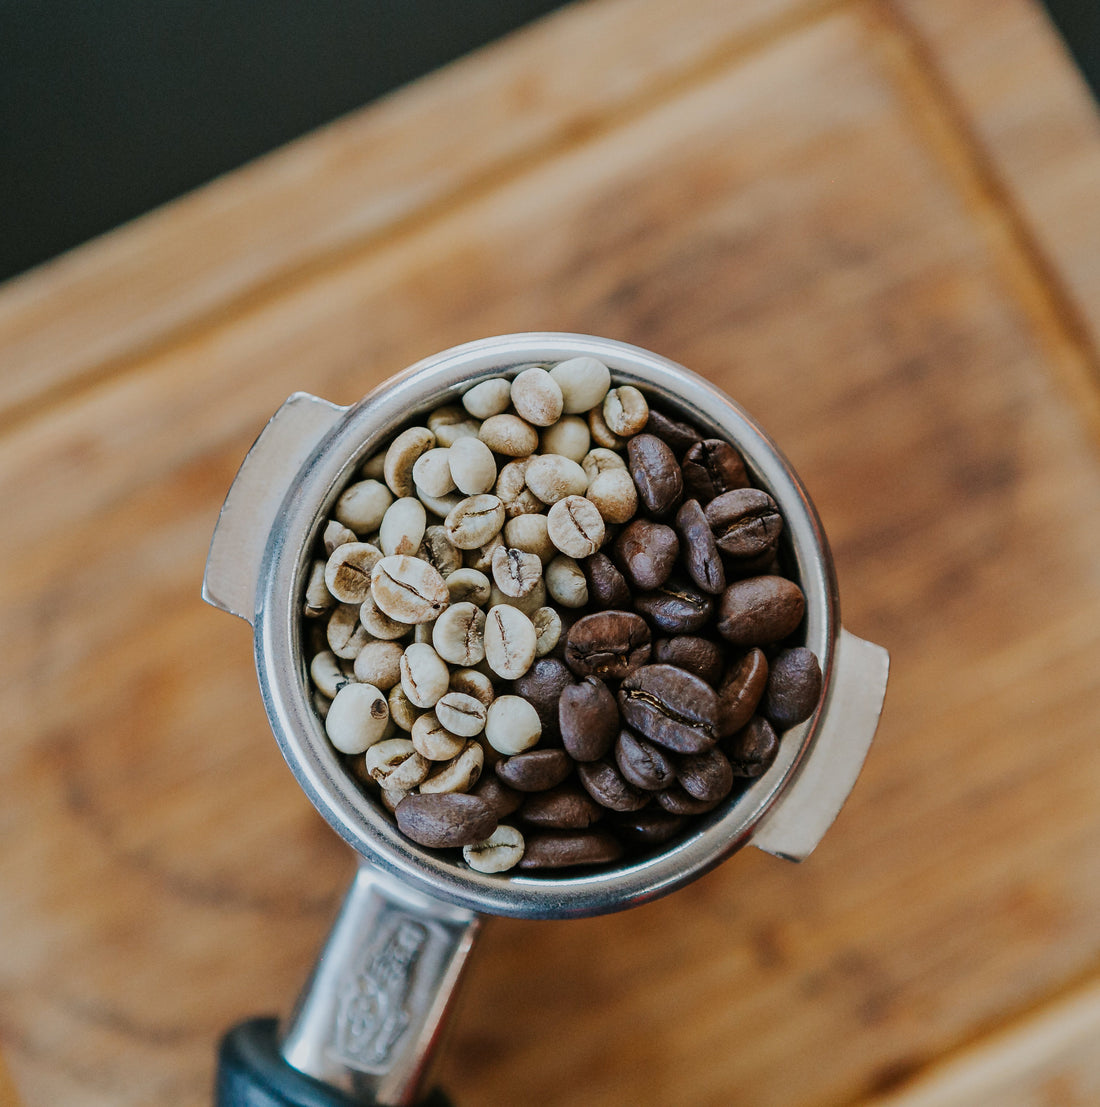 WHAT GOES INTO A COFFEE BLEND?